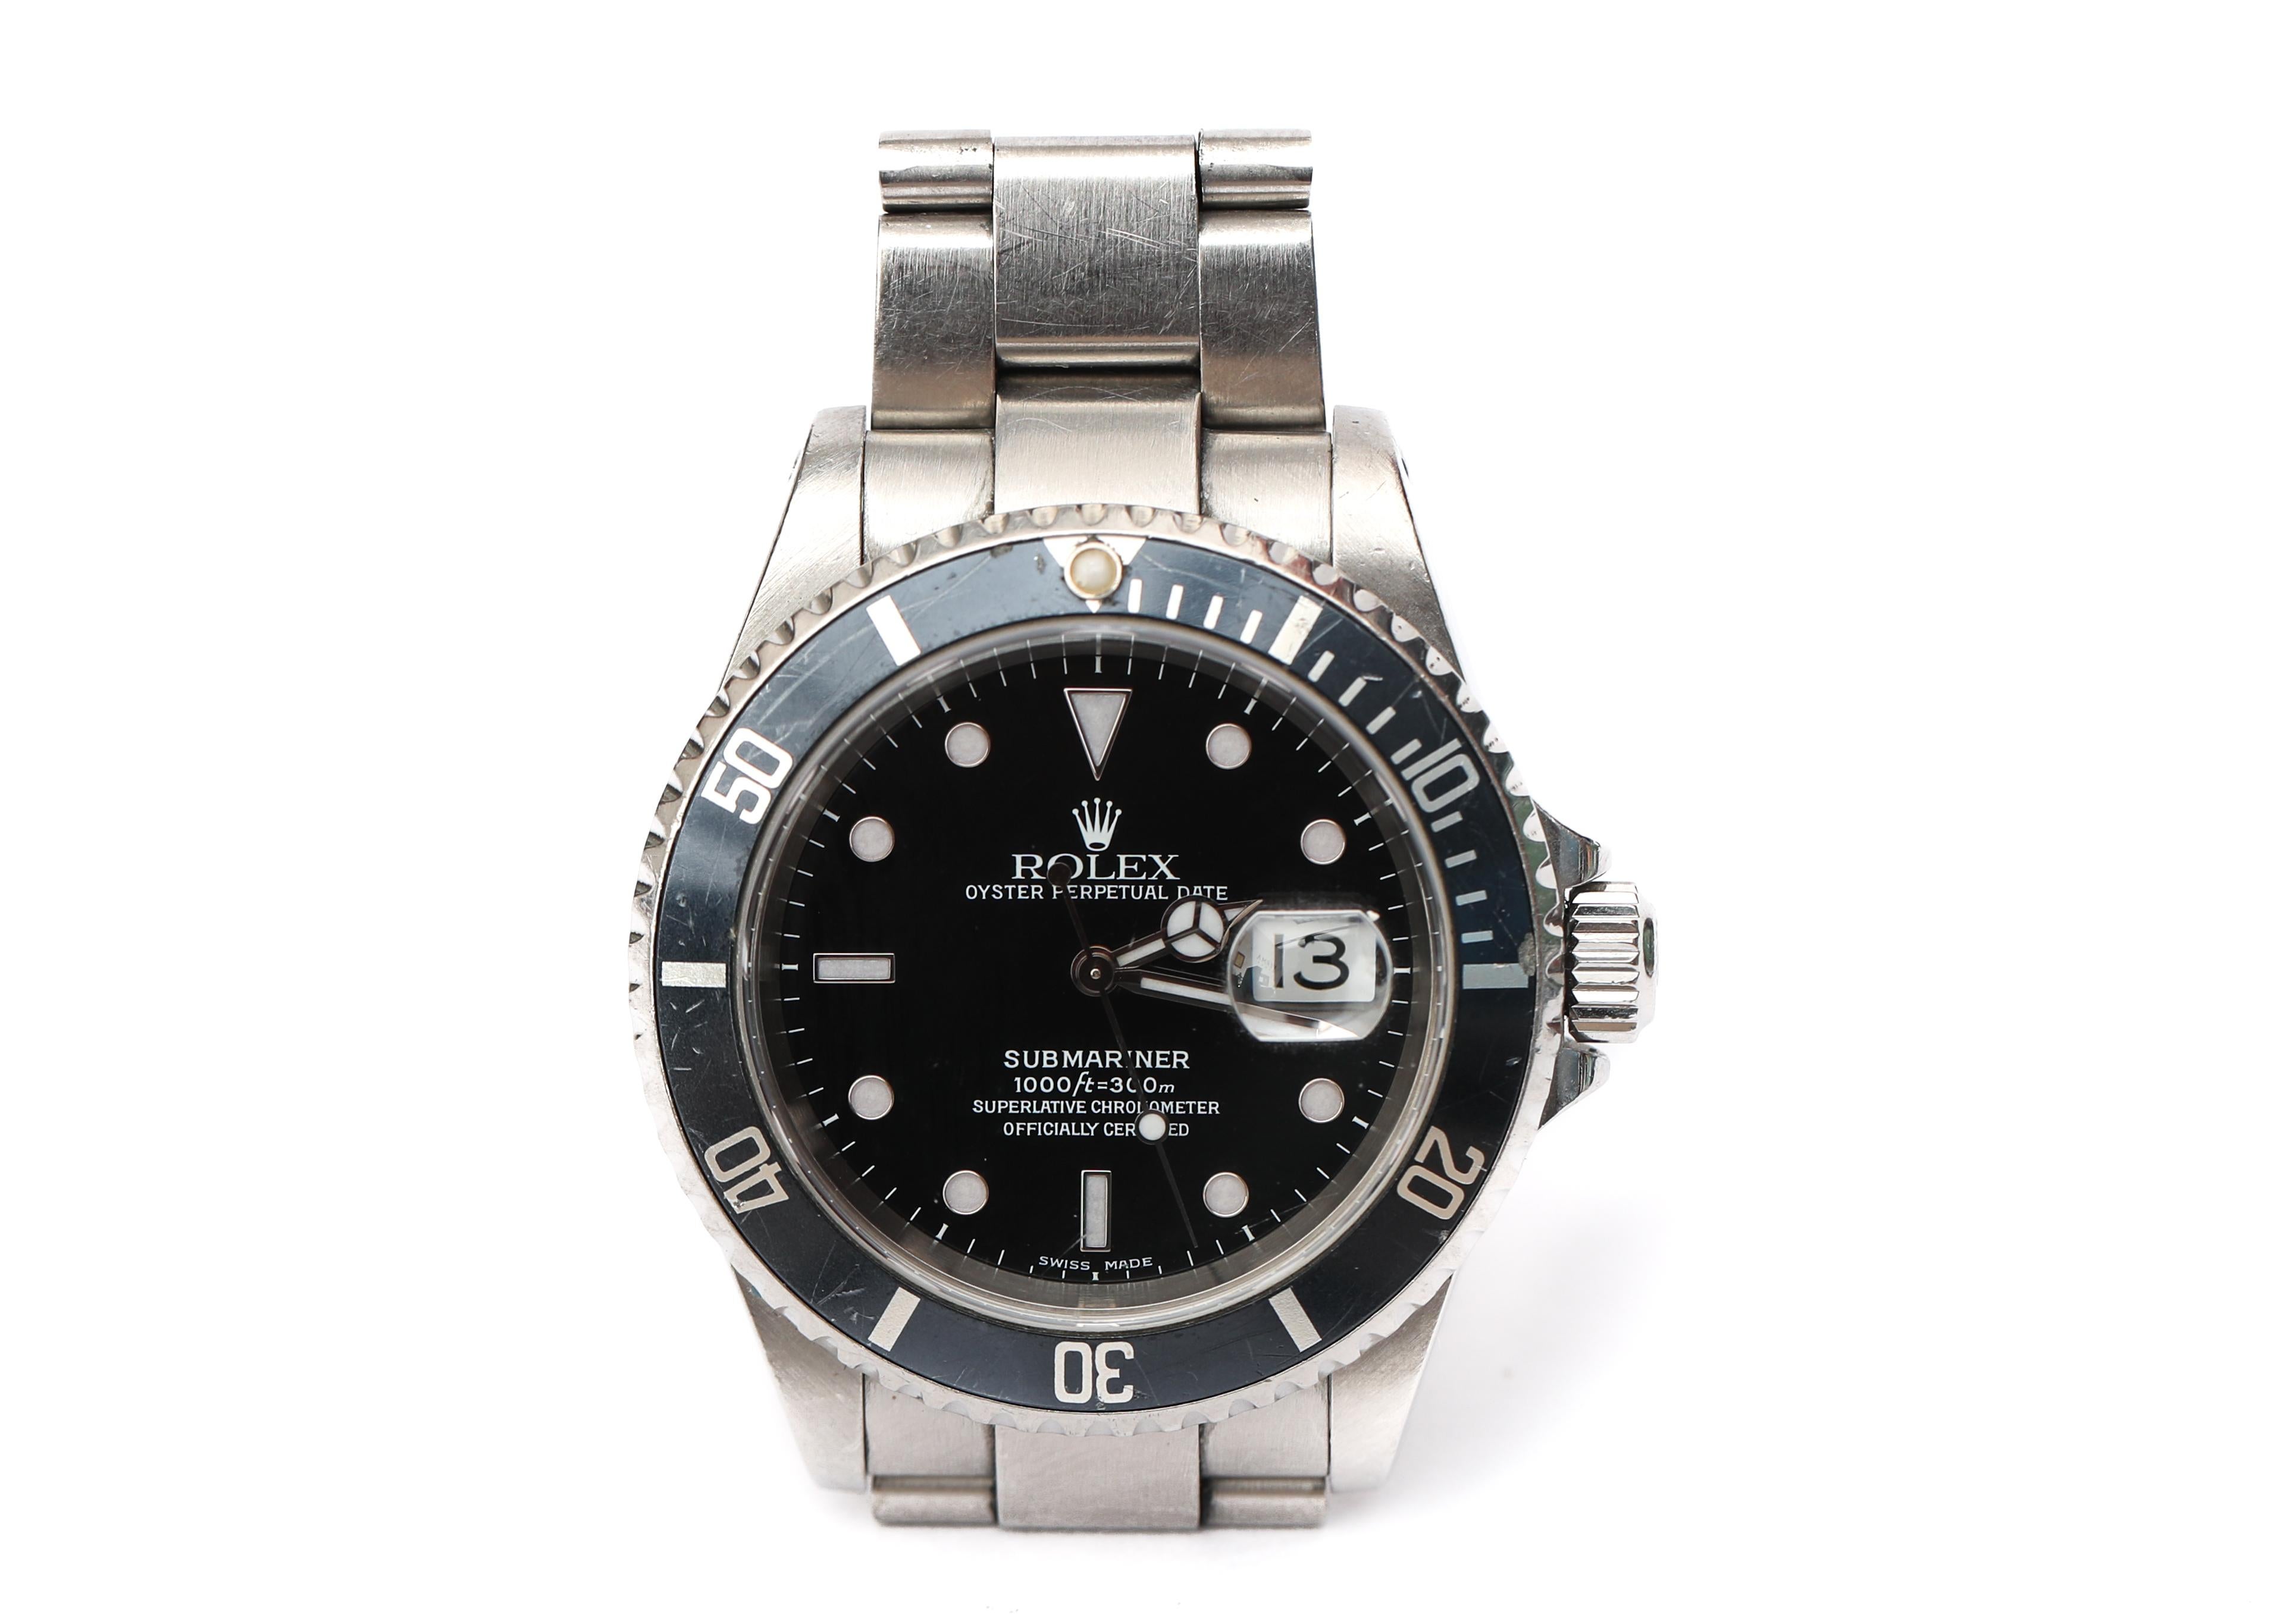 Rolex Submariner Date Oyster Perpetual Chronometer Diver's Wristwatch

Beauty, Brains, Balls and a How-To Manual all in one Package!

Own a piece of history with this Iconic Rolex infused with adventure and stories it will never tell... worn by